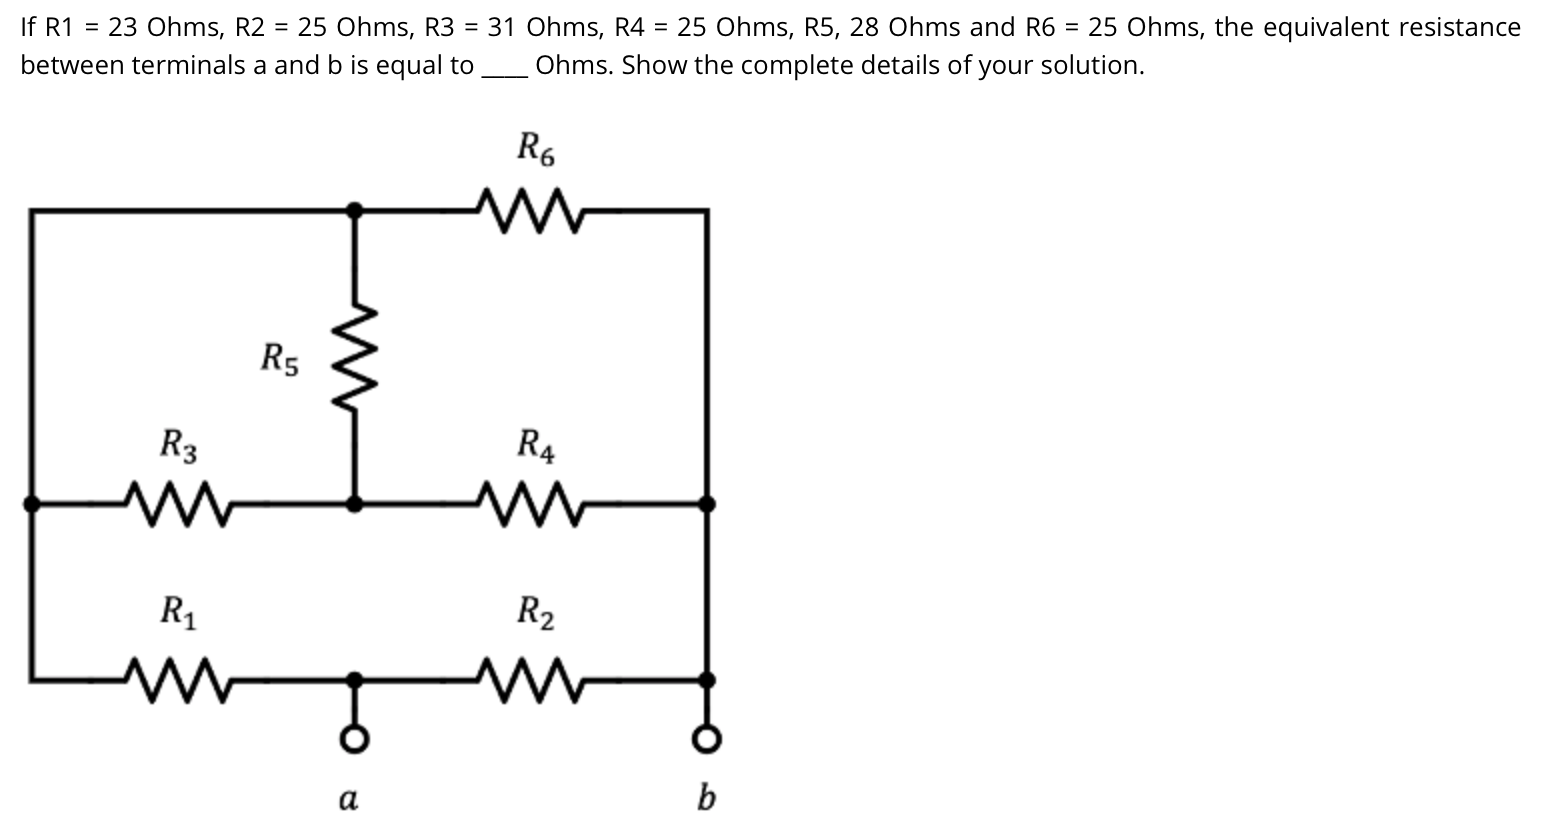 If R1 = 23 Ohms, R2
= 25 Ohms, R3 = 31 Ohms, R4 = 25 Ohms, R5, 28 Ohms and R6 = 25 Ohms, the equivalent resistance
between terminals a and b is equal to
Ohms. Show the complete details of your solution.
